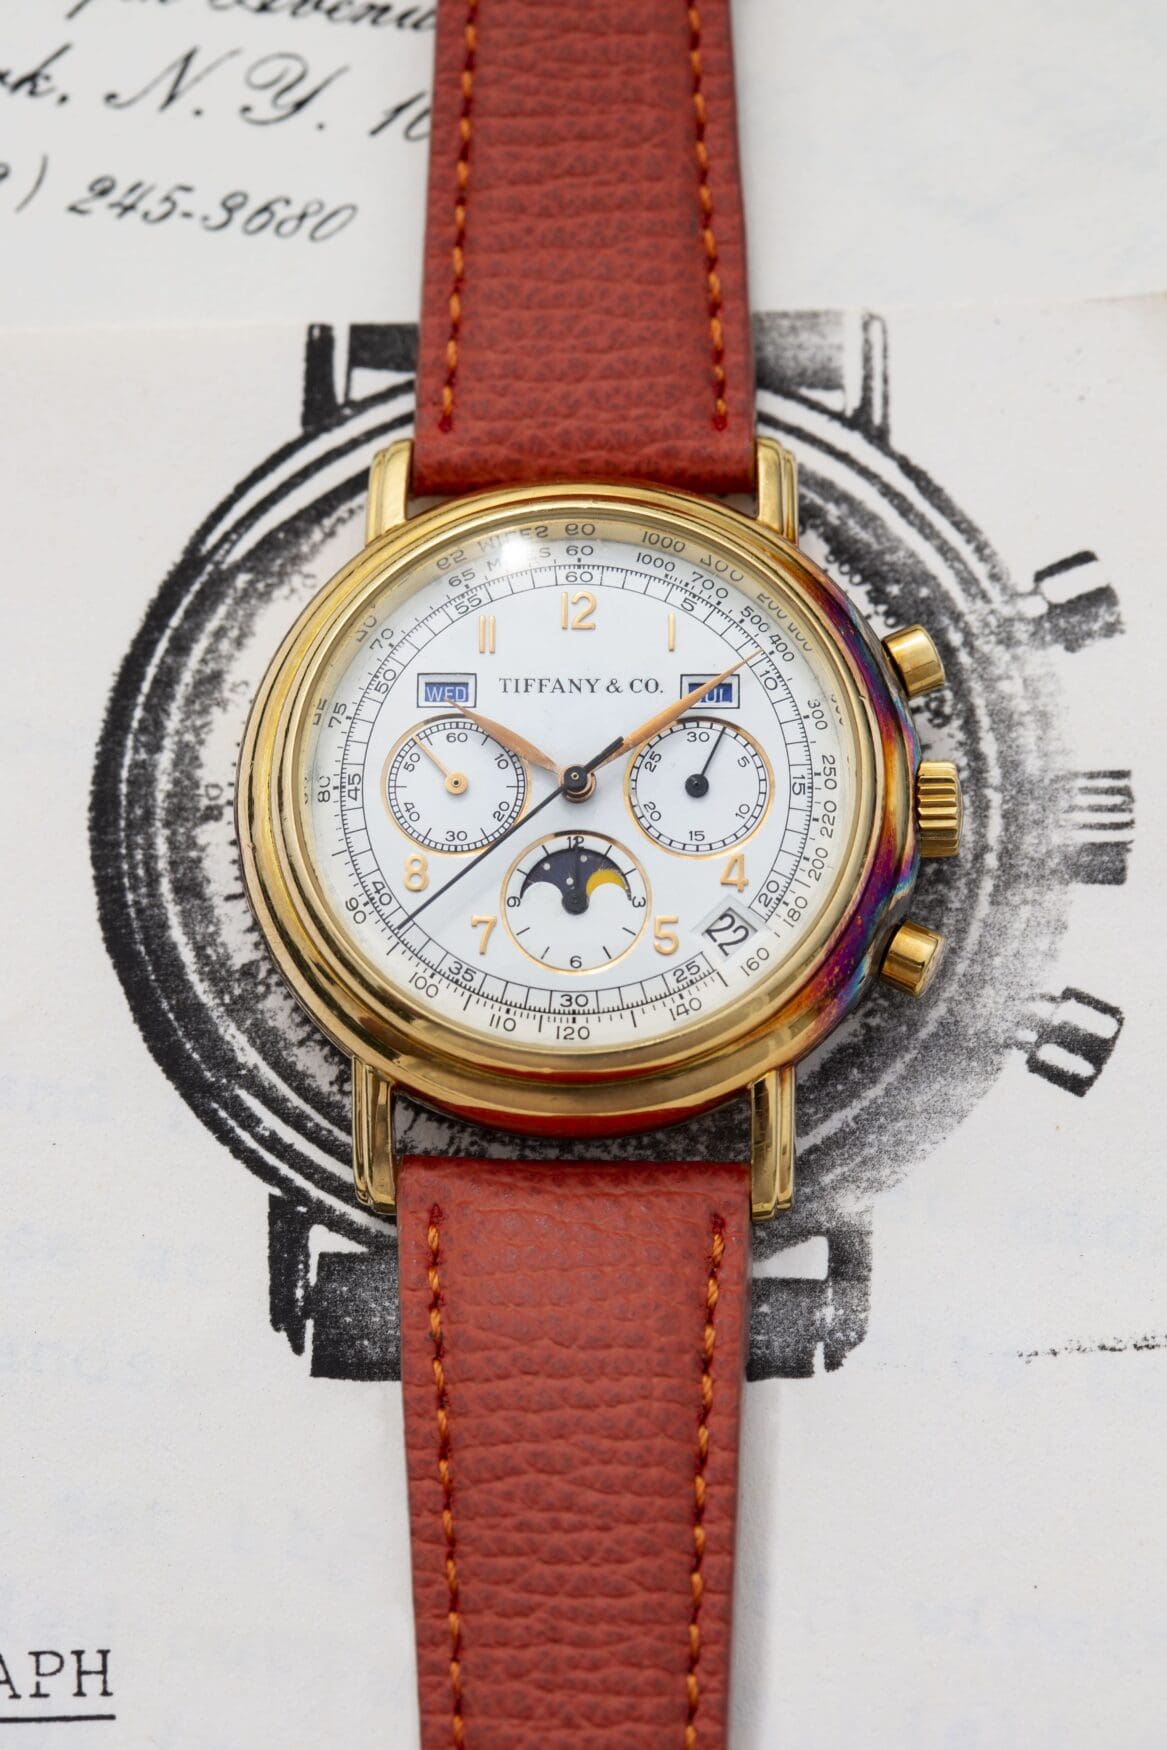 The astounding history of Waldan Watches unfolds like a Hollywood movie